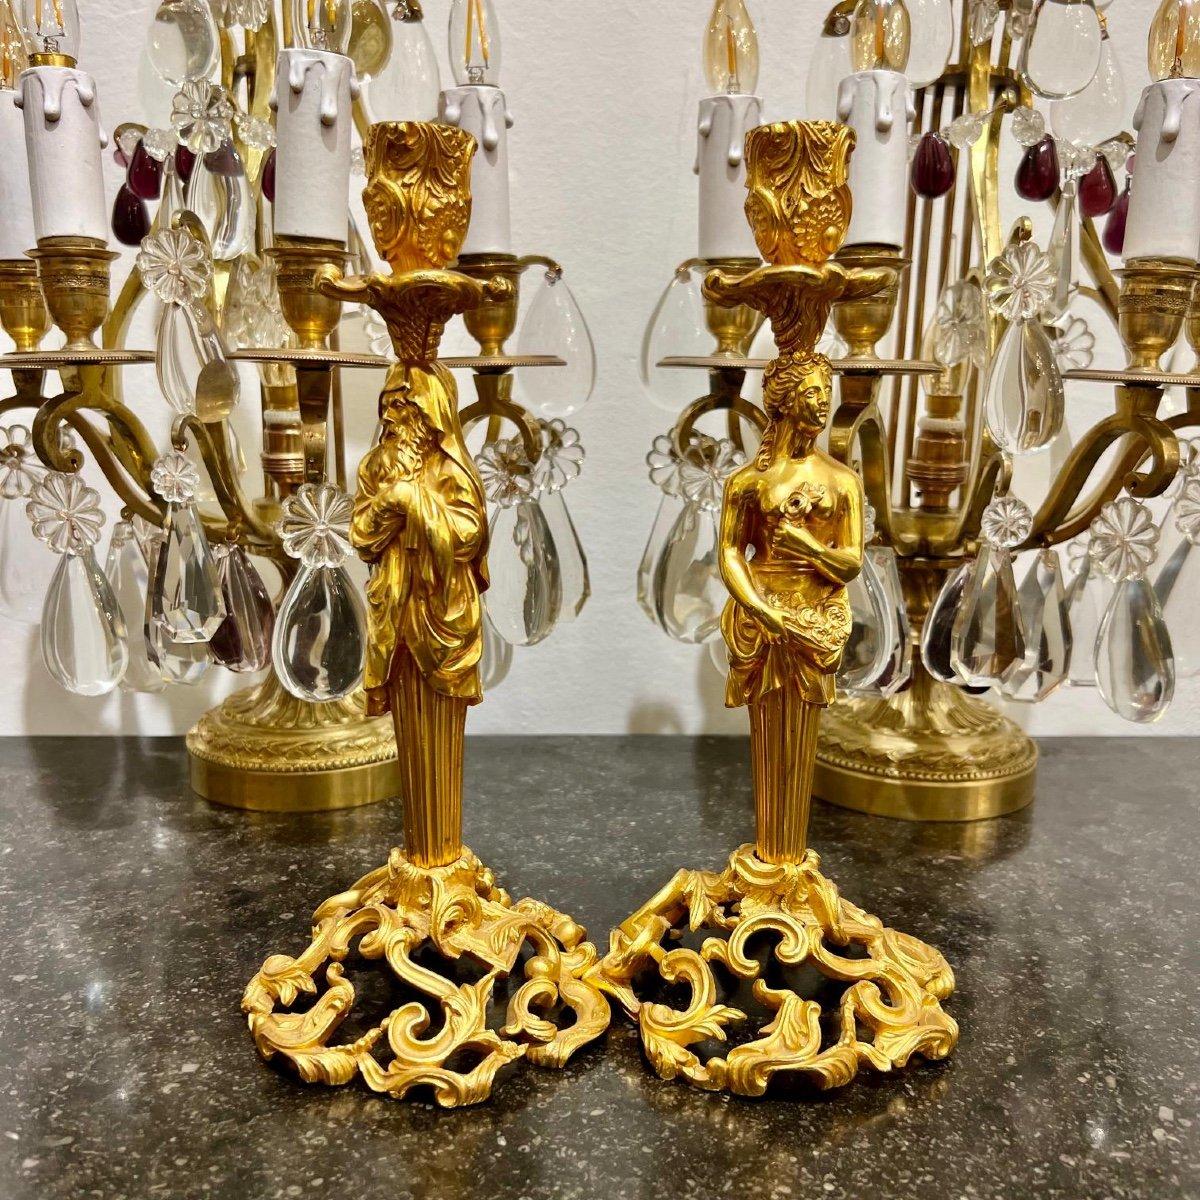 These gorgeous candlesticks are made of gilded bronze in the style of Napoleon III. Their stems are in the shape of figurines of a man and a woman in classical attires. They boast exquisite gilding and intricate chiselling, while their bases feature